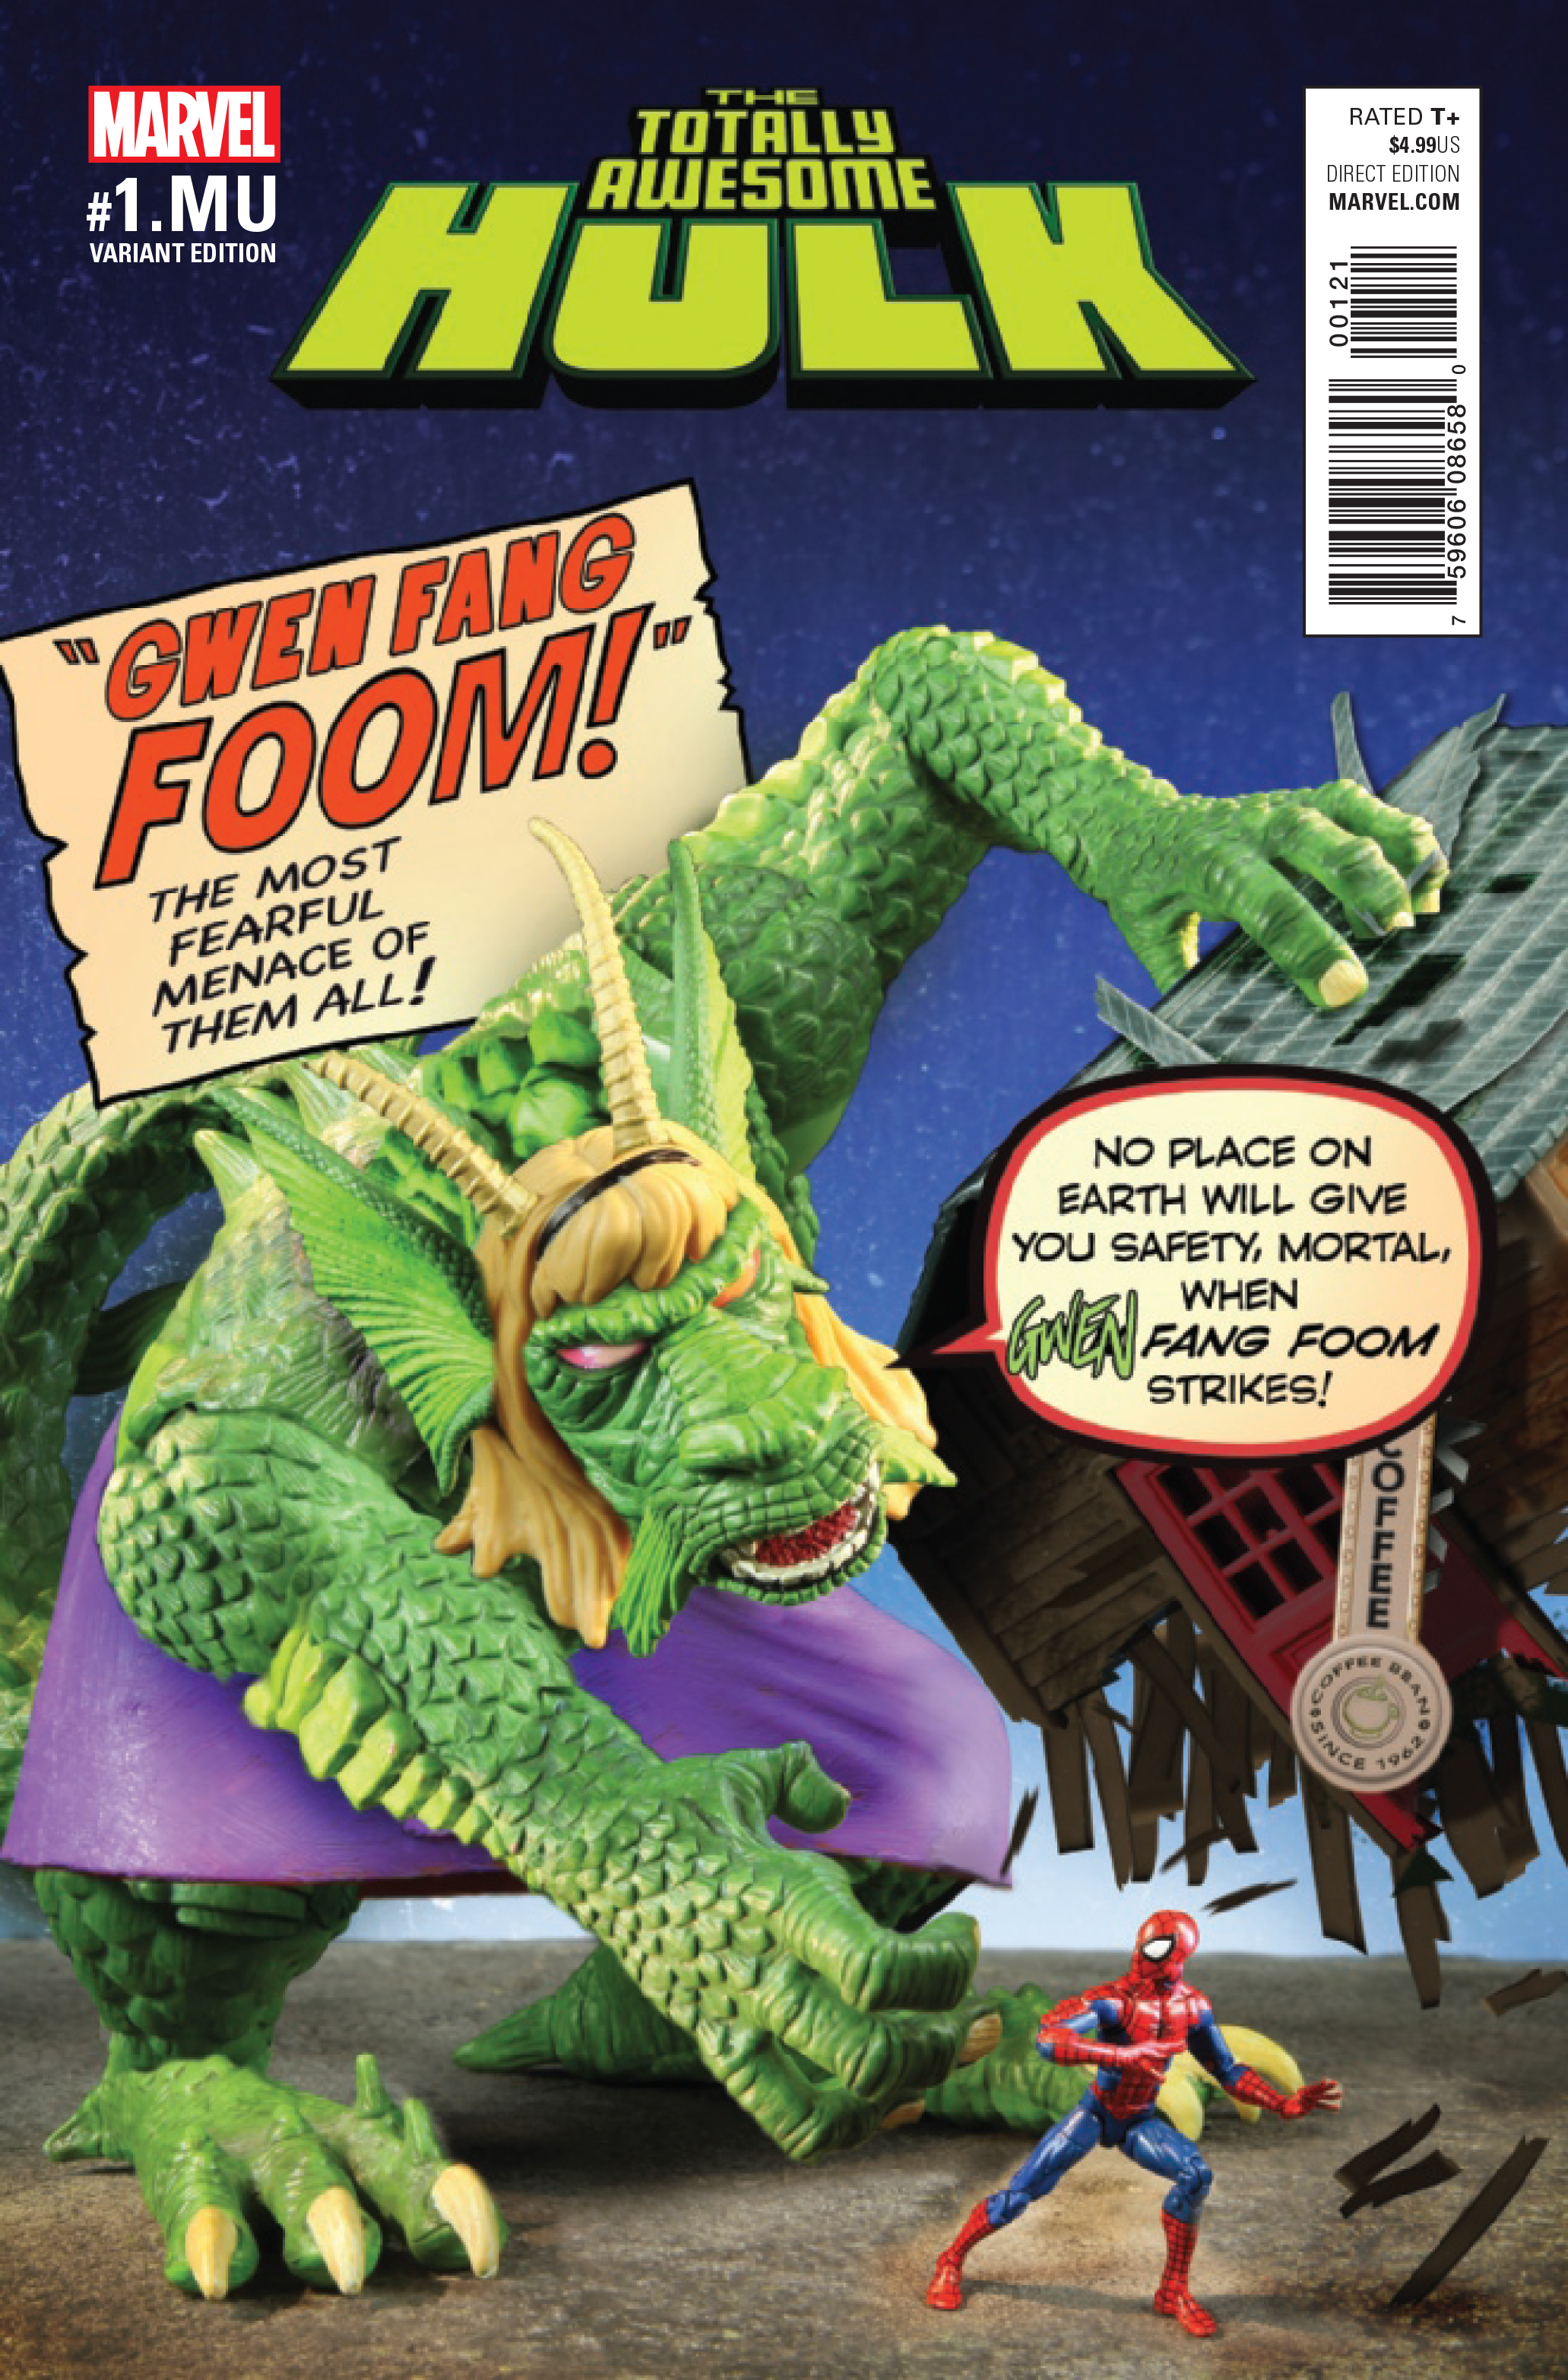 JAN170922 - TOTALLY AWESOME HULK #1.MU GWENSTER UNLEASHED VAR - Previews  World